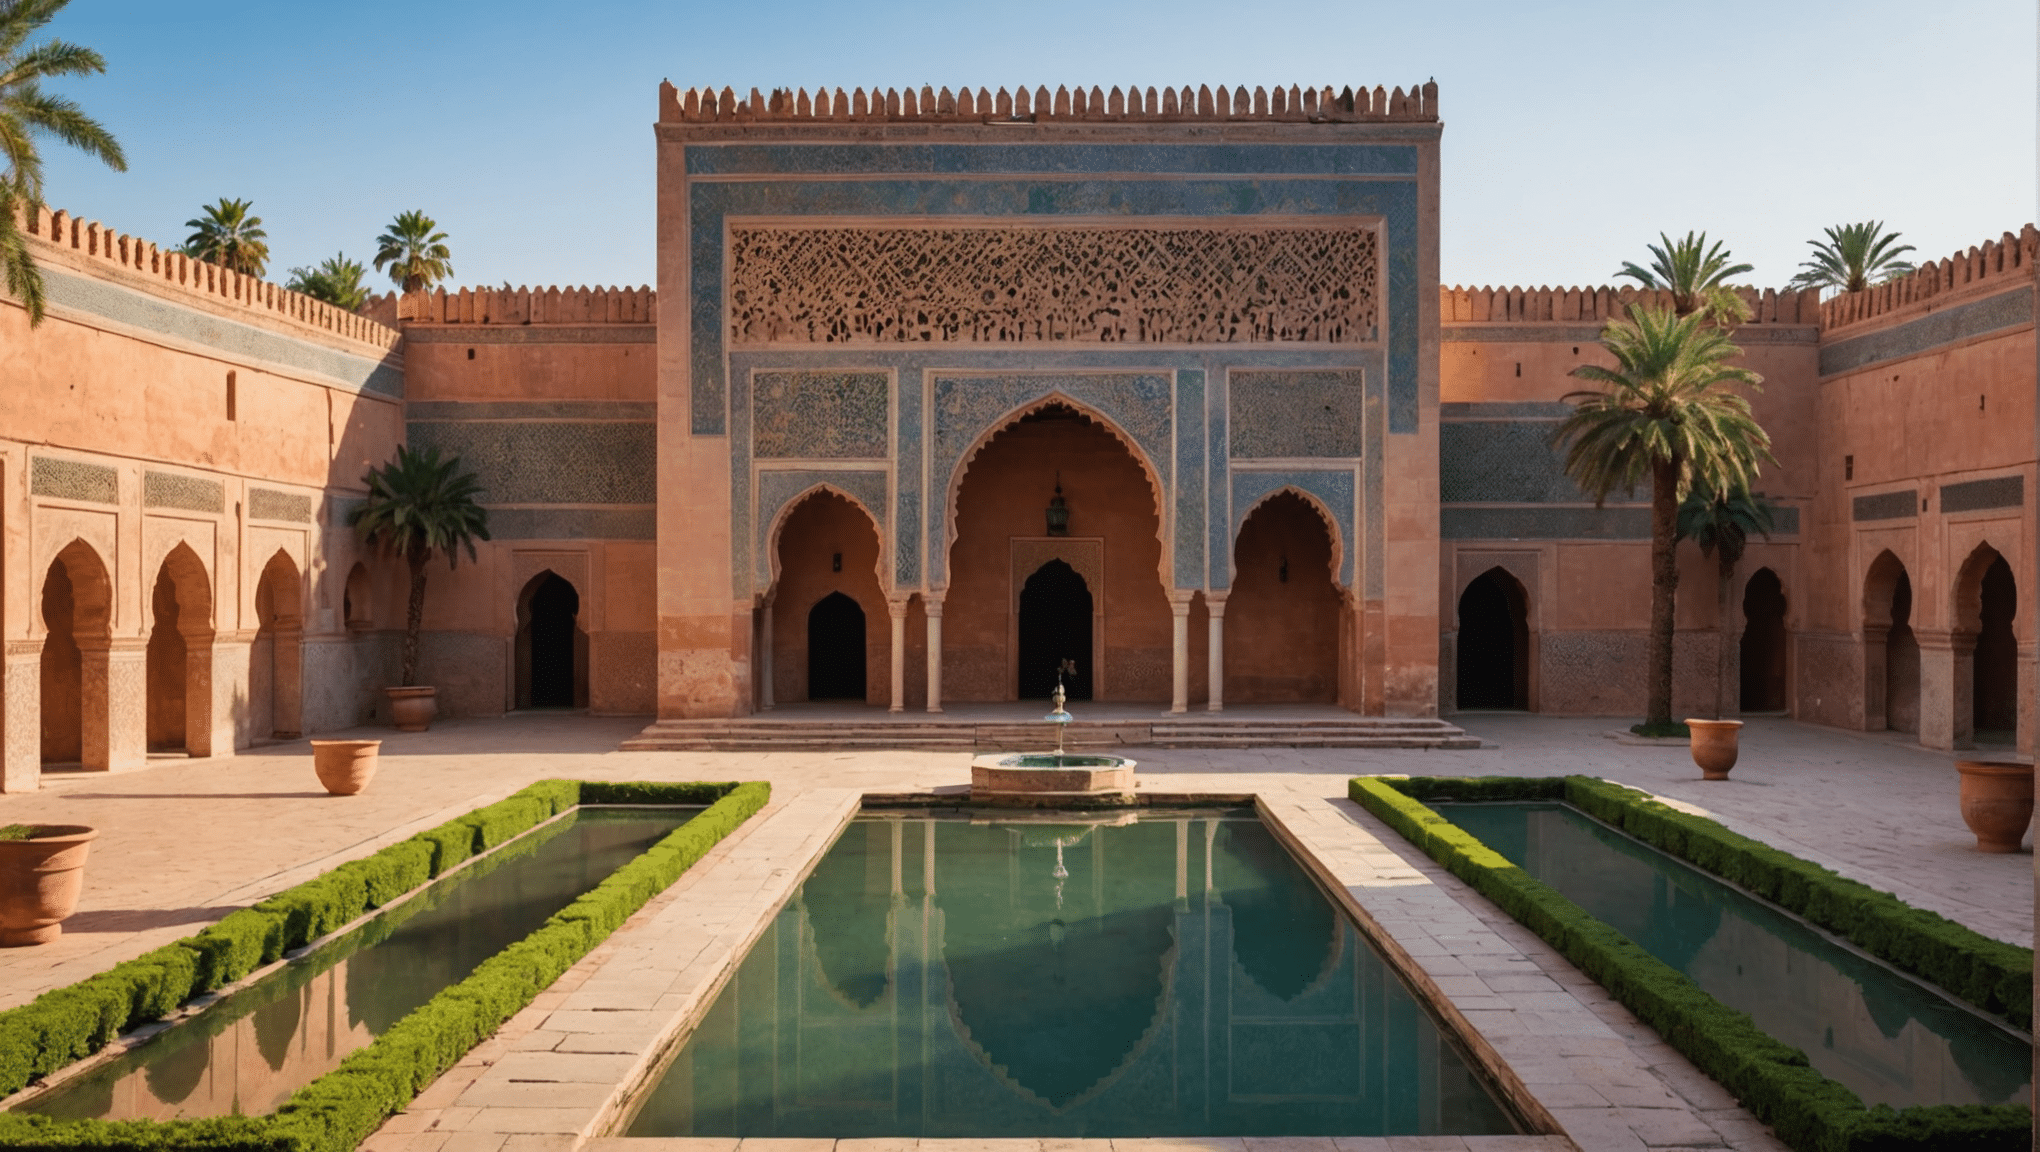 discover the historical significance and architectural beauty of the saadian tombs in marrakech, and find out why they are a must-see destination for any visitor to the city.